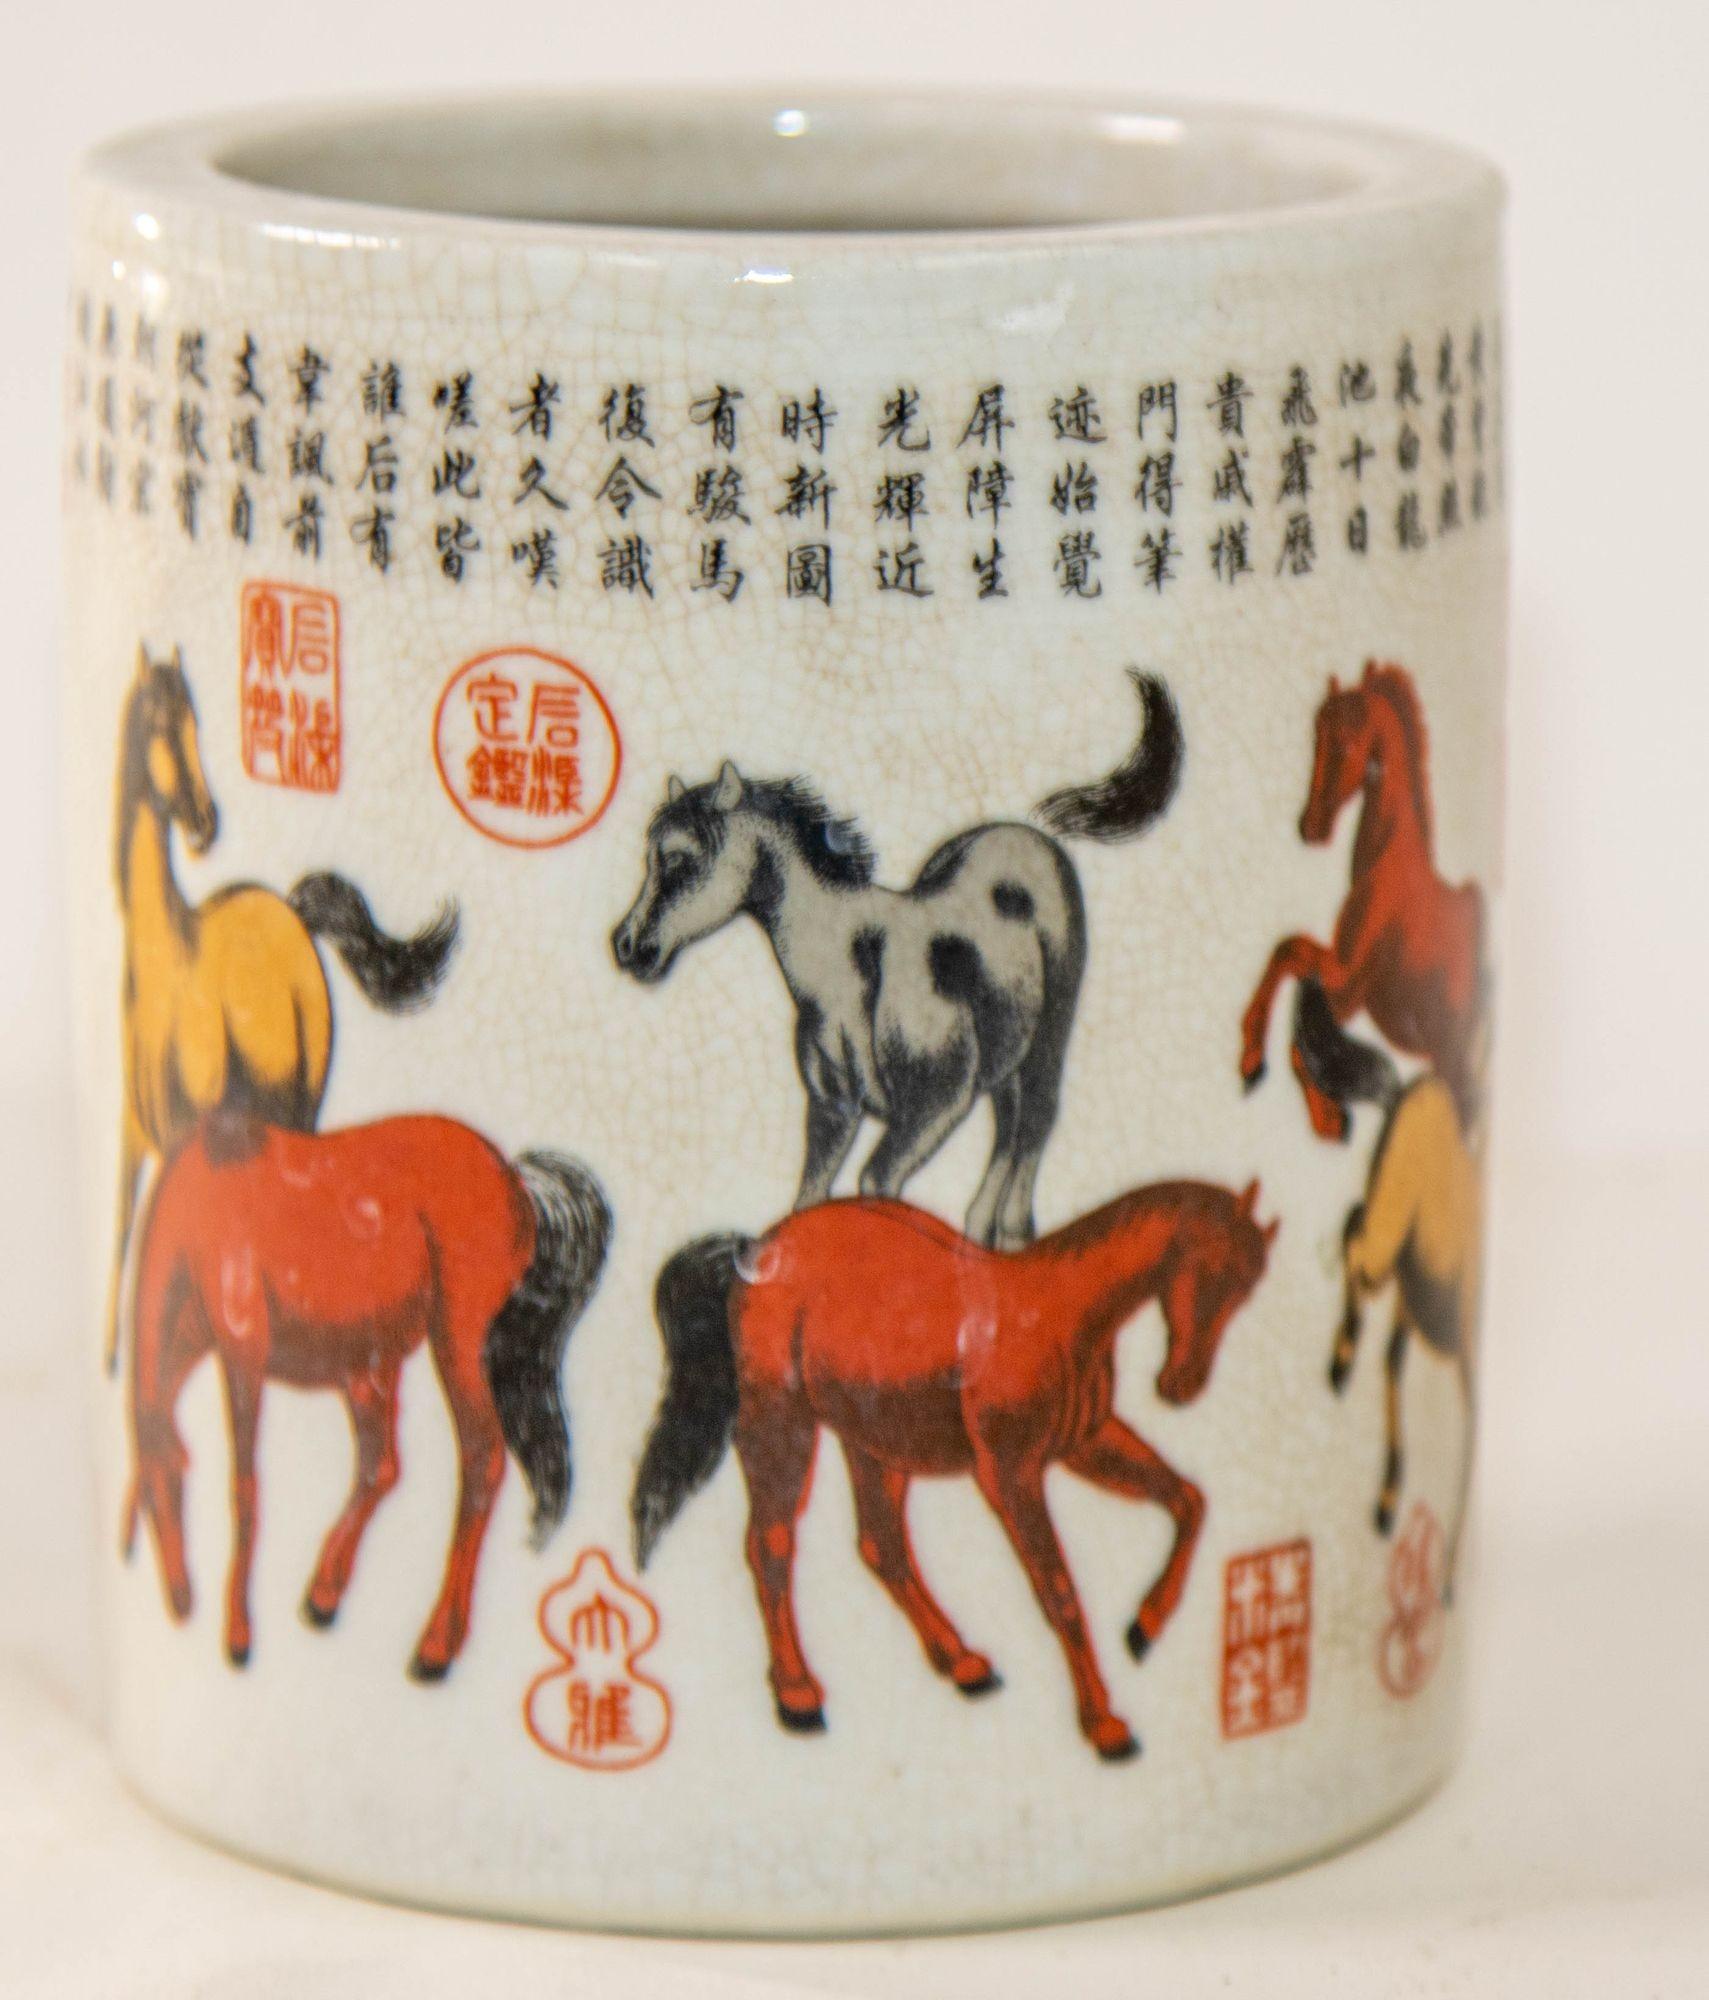 Vintage Chinese Porcelain Horses Pattern Brush Pot.
Chinese exquisite horse pattern porcelain vase, Chinese Qing Dynasty crackle glaze ceramic brush pot.
The circular ceramic pot is decorated with red, gray and orange colored horses which stood for